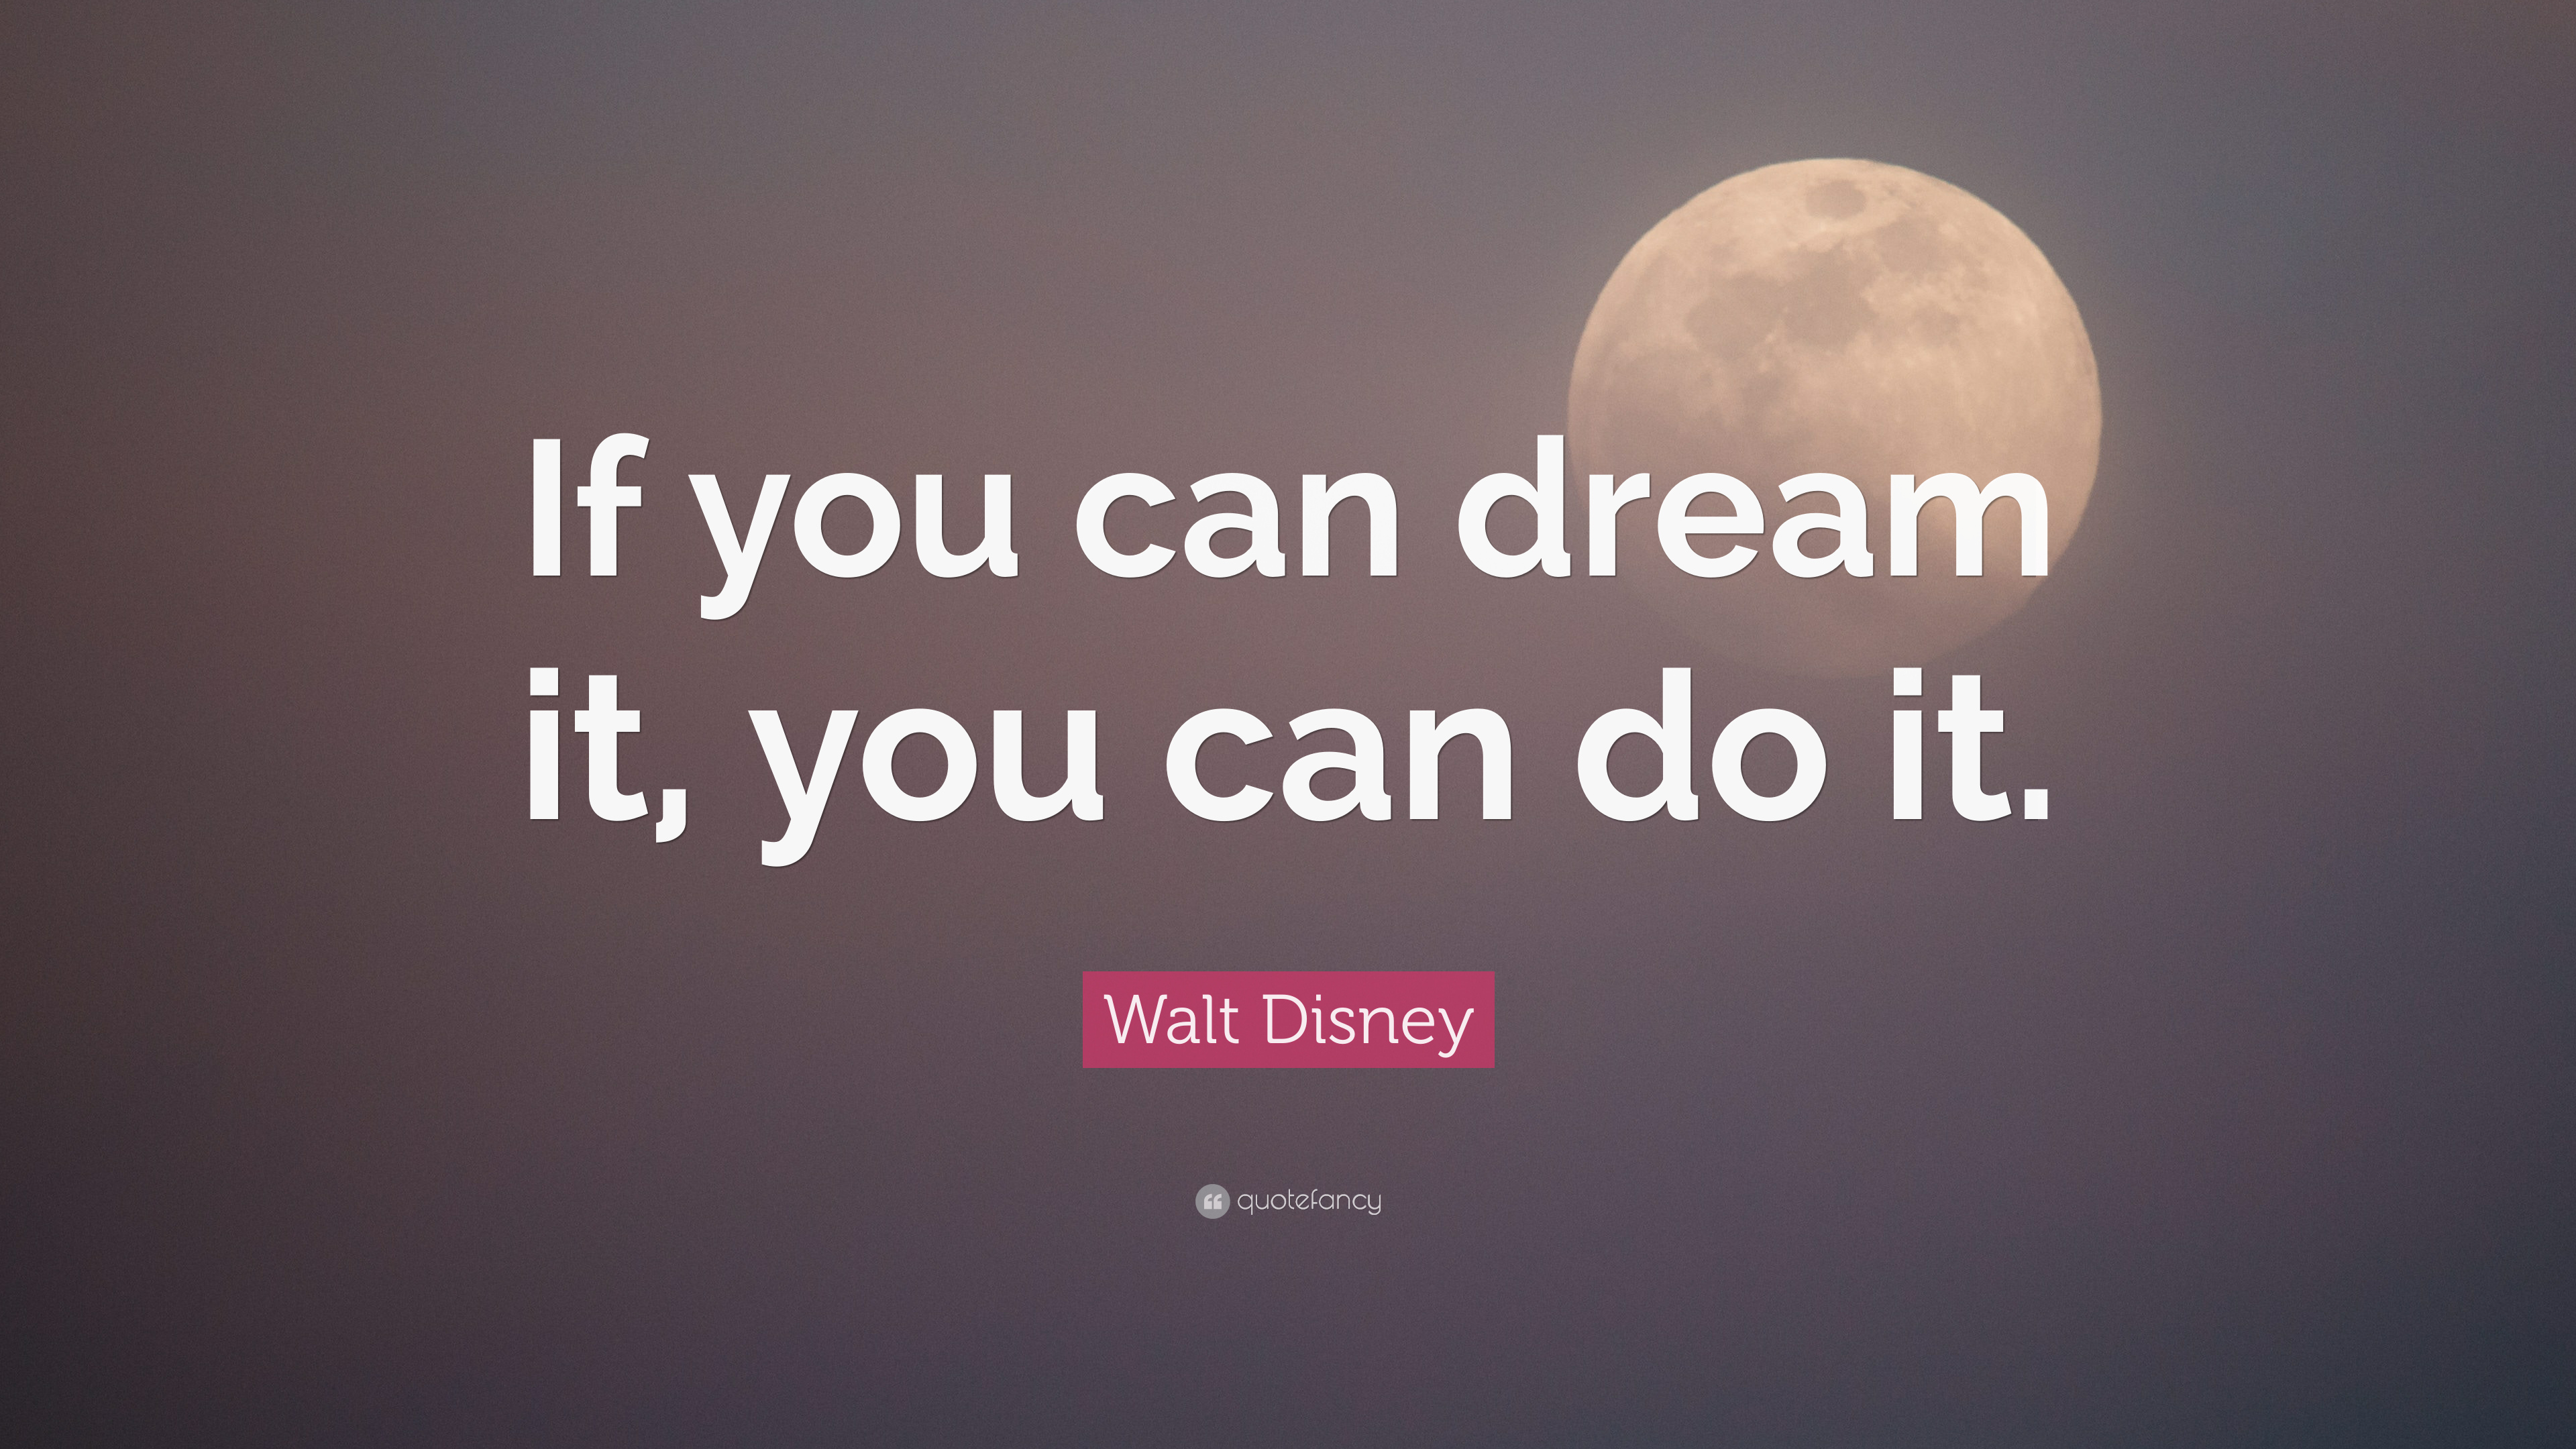 Walt Disney Quote: “If you can dream it, you can do it.” (28 wallpaper)